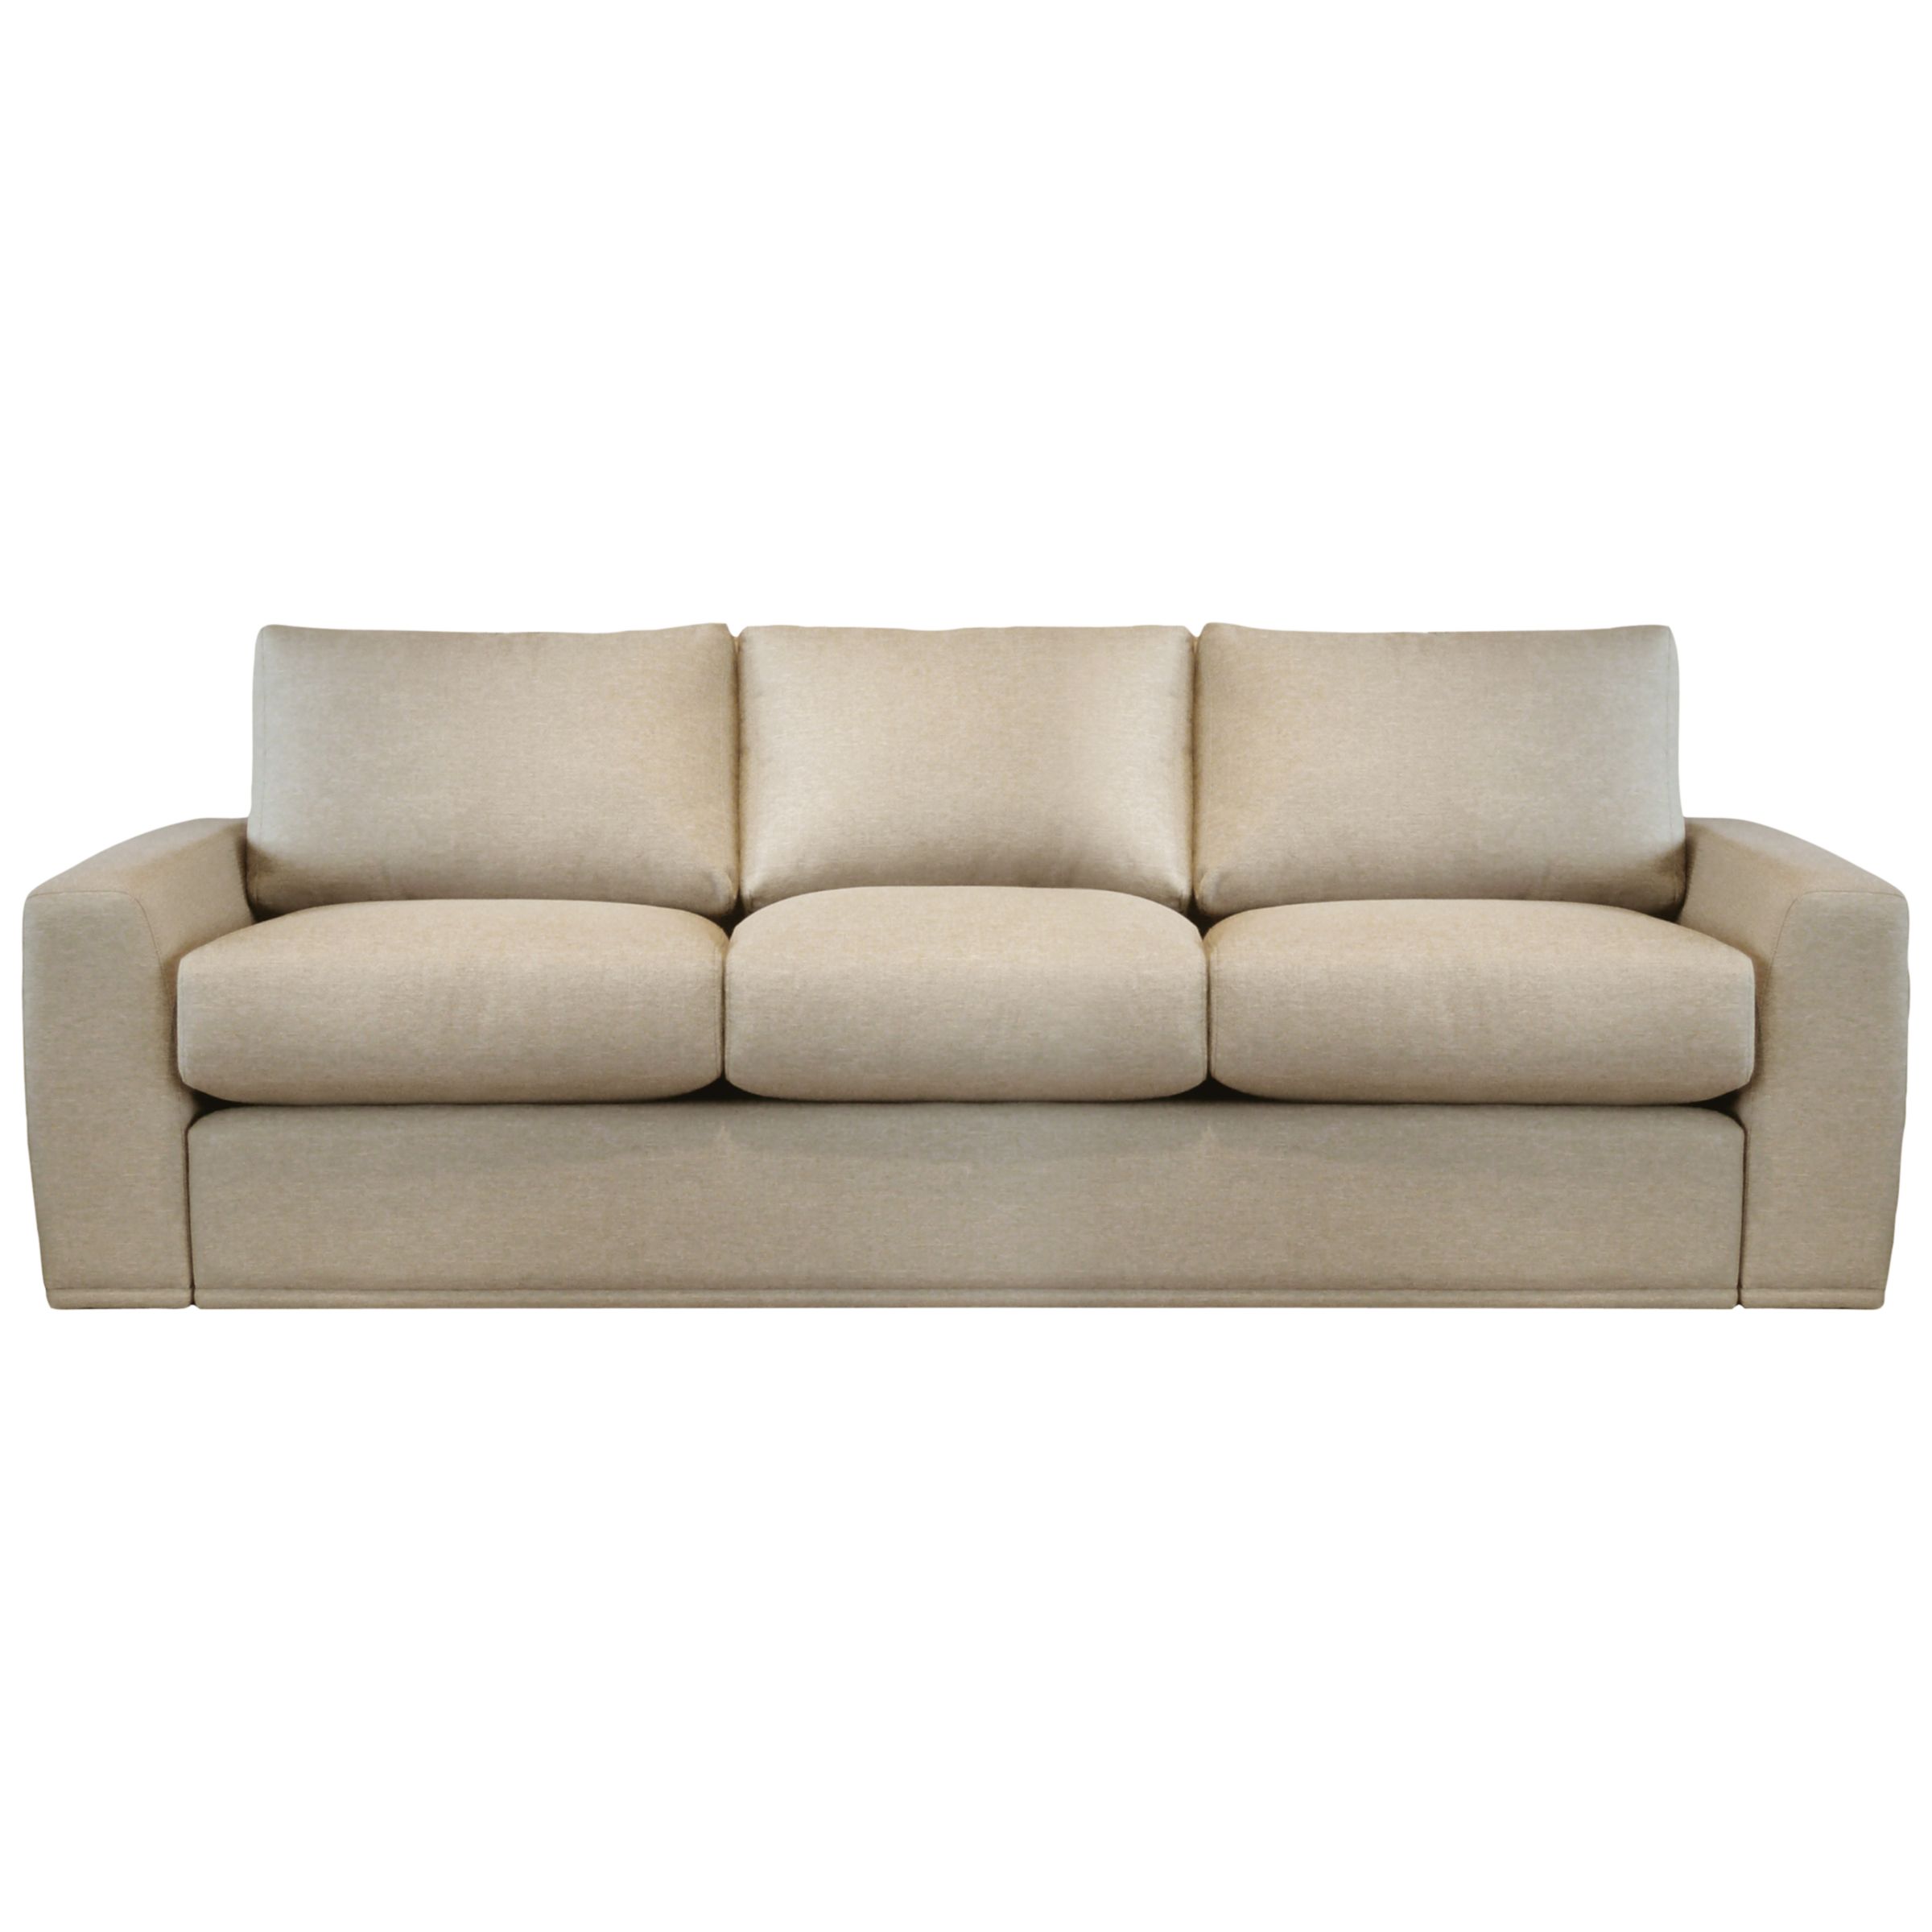 House by John Lewis Finlay Grand Sofa, Clay, width 242cm